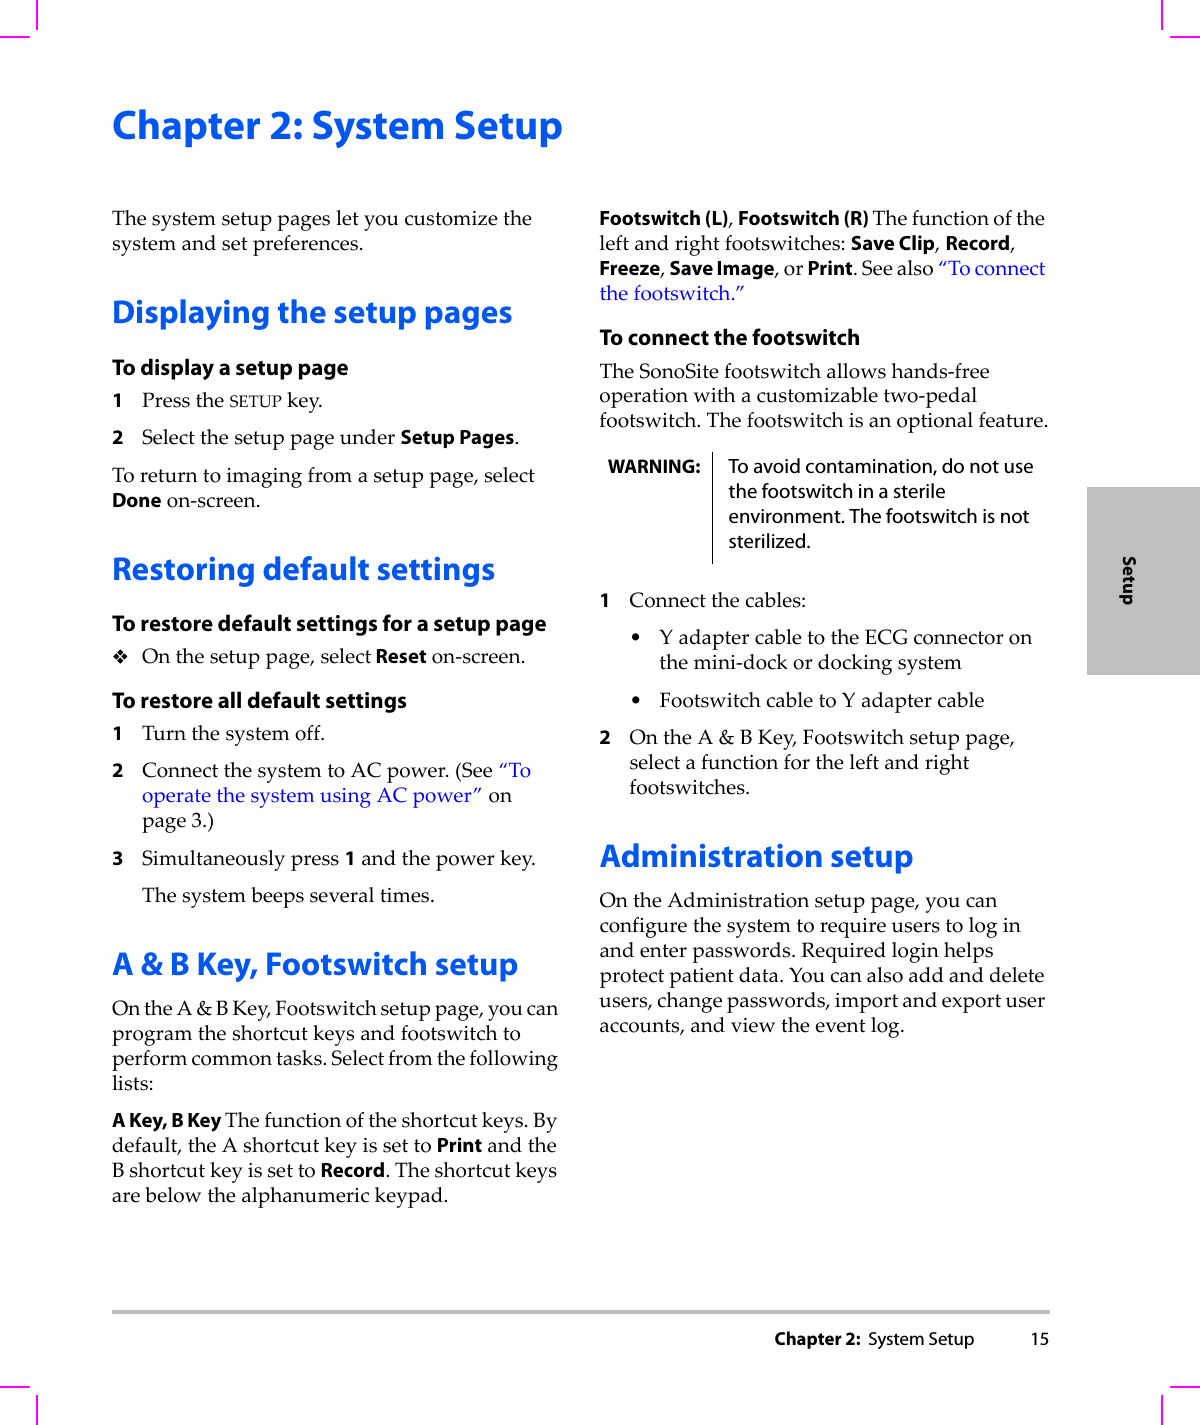 Chapter 2:  System Setup 15SetupChapter 2: System SetupThesystemsetuppagesletyoucustomizethesystemandsetpreferences.Displaying the setup pagesTo display a setup page1PresstheSETUPkey.2SelectthesetuppageunderSetup Pages.Toreturntoimagingfromasetuppage,selectDoneon‐screen.Restoring default settingsTo restore default settings for a setup pageOnthesetuppage,select Reseton‐screen.To restore all default settings1Turnthesystemoff.2ConnectthesystemtoACpower.(See“TooperatethesystemusingACpower”onpage 3.)3Simultaneouslypress1andthepowerkey.Thesystembeepsseveraltimes.A &amp; B Key, Footswitch setupOntheA&amp;BKey,Footswitchsetuppage,youcanprogramtheshortcutkeysandfootswitchtoperformcommontasks.Selectfromthefollowinglists:A Key, B Key Thefunctionoftheshortcutkeys.Bydefault,theAshortcutkeyissettoPrintandtheBshortcutkeyissettoRecord.Theshortcutkeysarebelowthealphanumerickeypad.Footswitch (L),Footswitch (R) Thefunctionoftheleftandrightfootswitches:Save Clip,Record,Freeze,Save Image,orPrint.Seealso“Toconnectthefootswitch.”To connect the footswitchTheSonoSitefootswitchallowshands‐freeoperationwithacustomizabletwo‐pedalfootswitch.Thefootswitchisanoptionalfeature.1Connectthecables:•YadaptercabletotheECGconnectoronthemini‐dockordockingsystem•FootswitchcabletoYadaptercable2OntheA&amp;BKey,Footswitchsetuppage,selectafunctionfortheleftandrightfootswitches.Administration setupOntheAdministrationsetuppage,youcanconfigurethesystemtorequireuserstologinandenterpasswords.Requiredloginhelpsprotectpatientdata.Youcanalsoaddanddeleteusers,changepasswords,importandexportuseraccounts,andviewtheeventlog.WARNING: To avoid contamination, do not use the footswitch in a sterile environment. The footswitch is not sterilized.